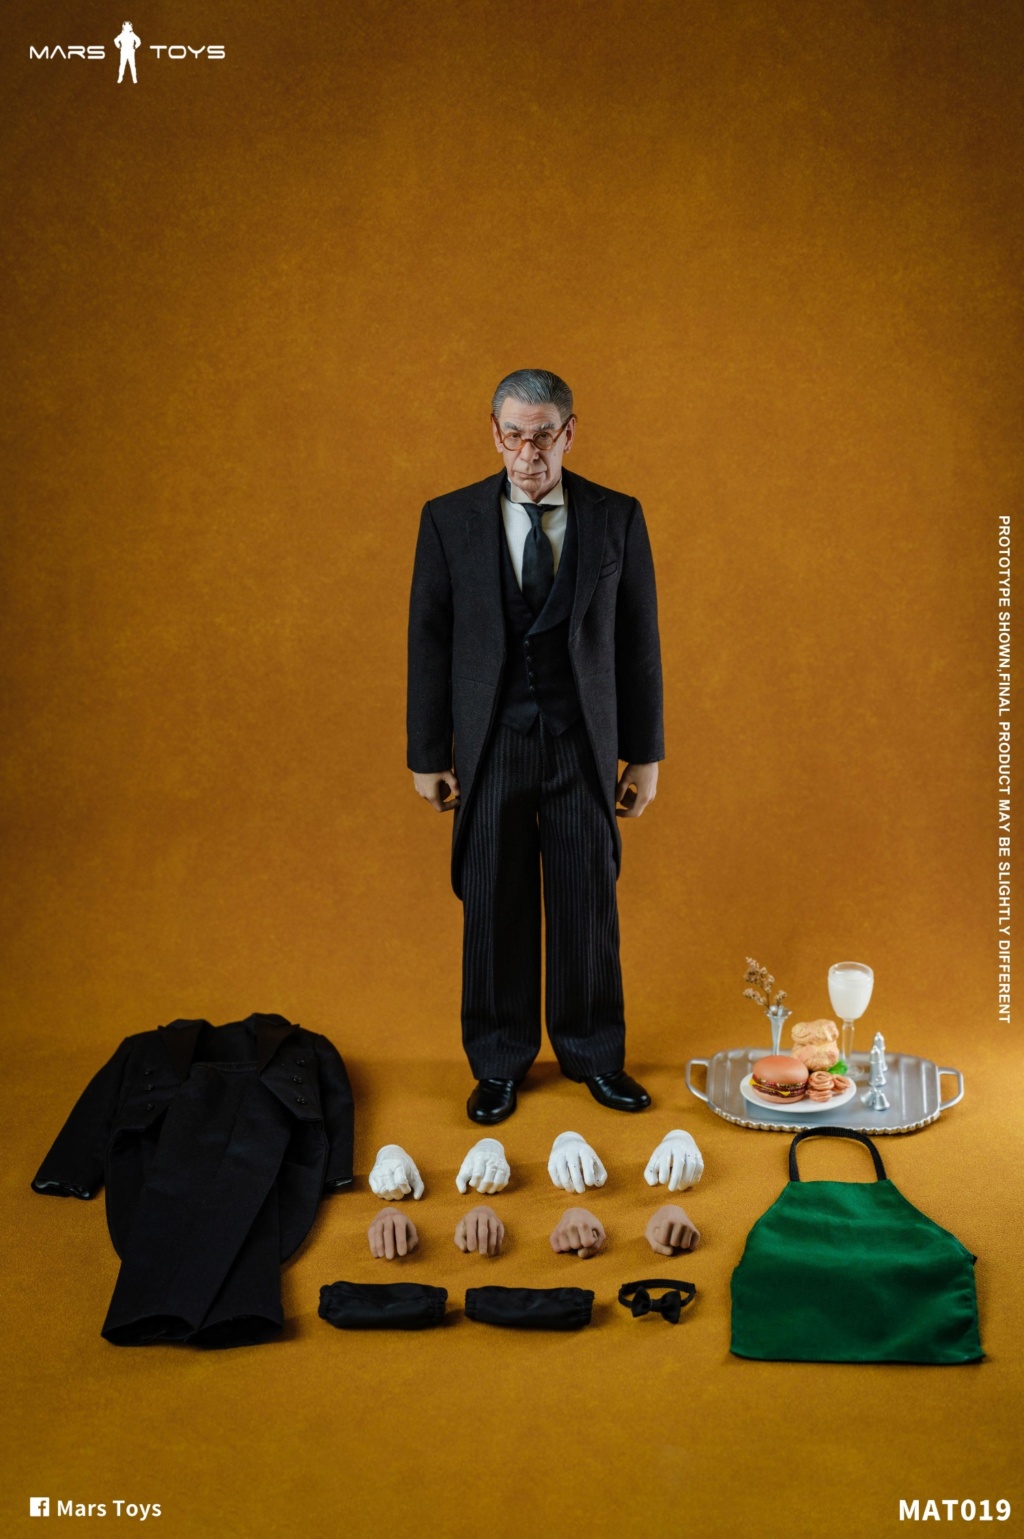 movie-based - NEW PRODUCT: Mars Toys: 1/6 Old Housekeeper Mr.A Action Figure MAT019 47011110